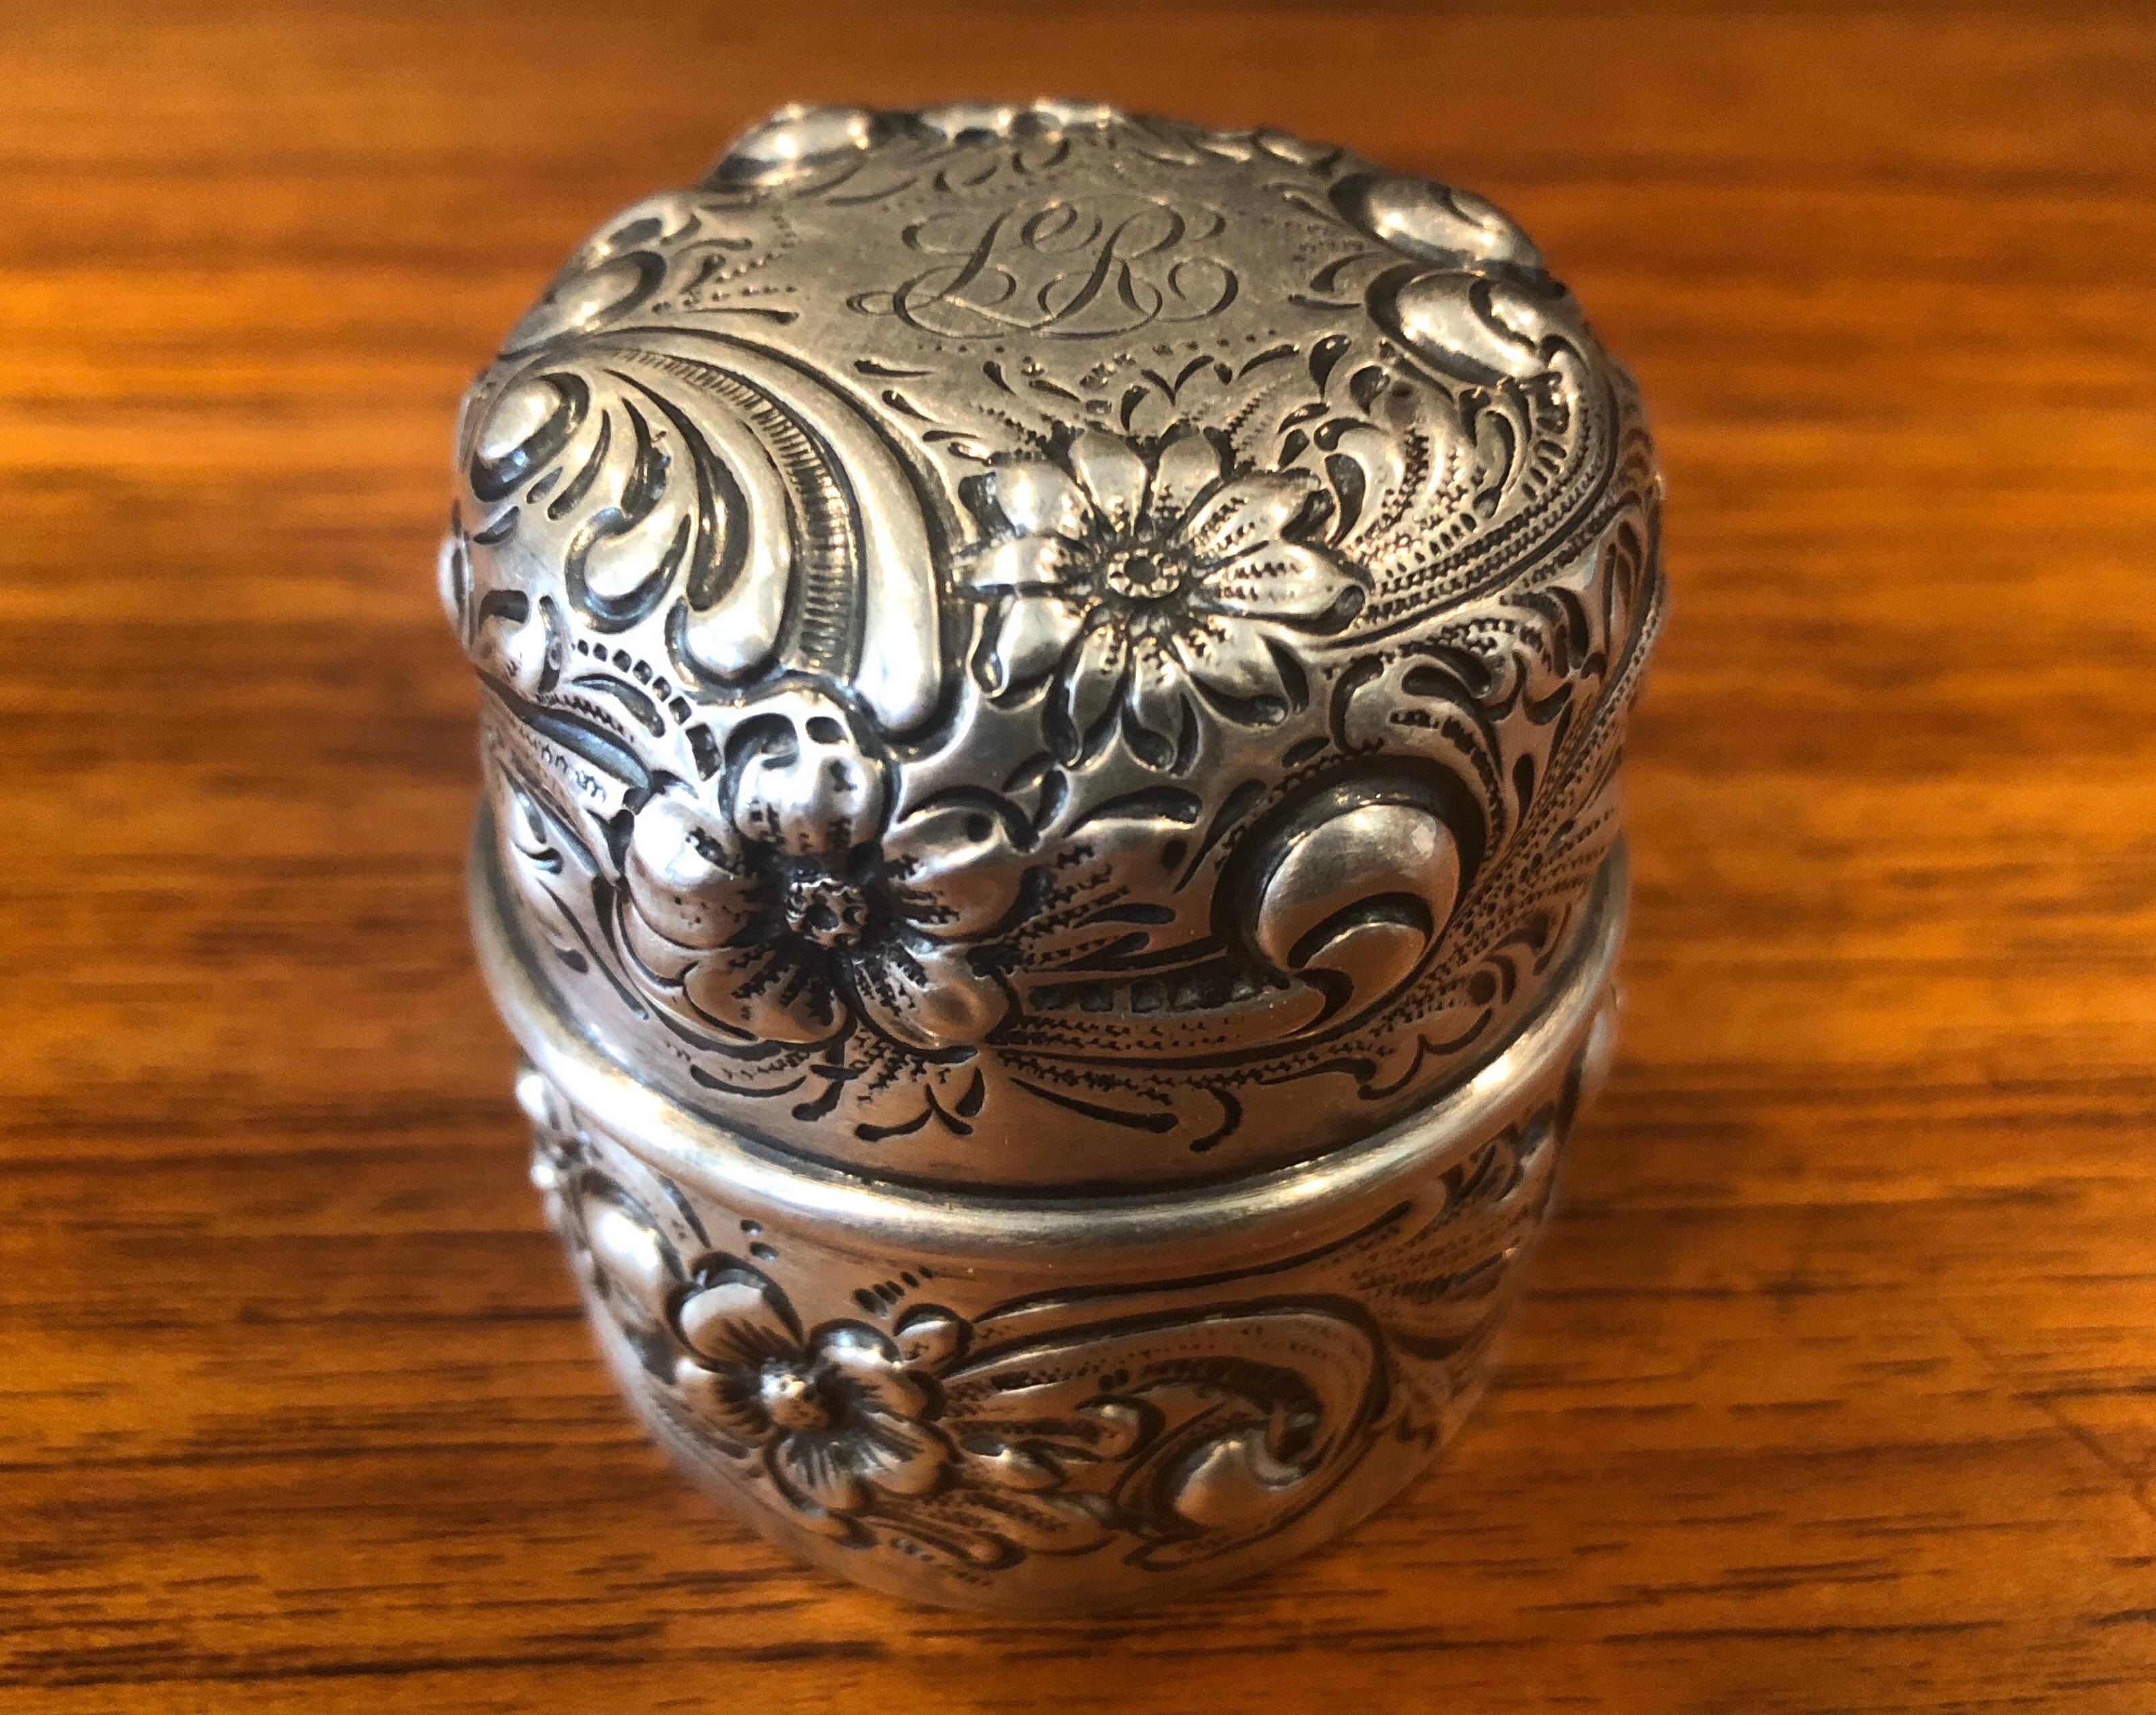 A rare antique hand-hammered repousse sterling silver inkwell by Howard & Co. New York, circa 1903. The inkwell has a single back hinge to open the lid and a bun cap and the glass liner. Stamped on the bottom: “Howard & Co.